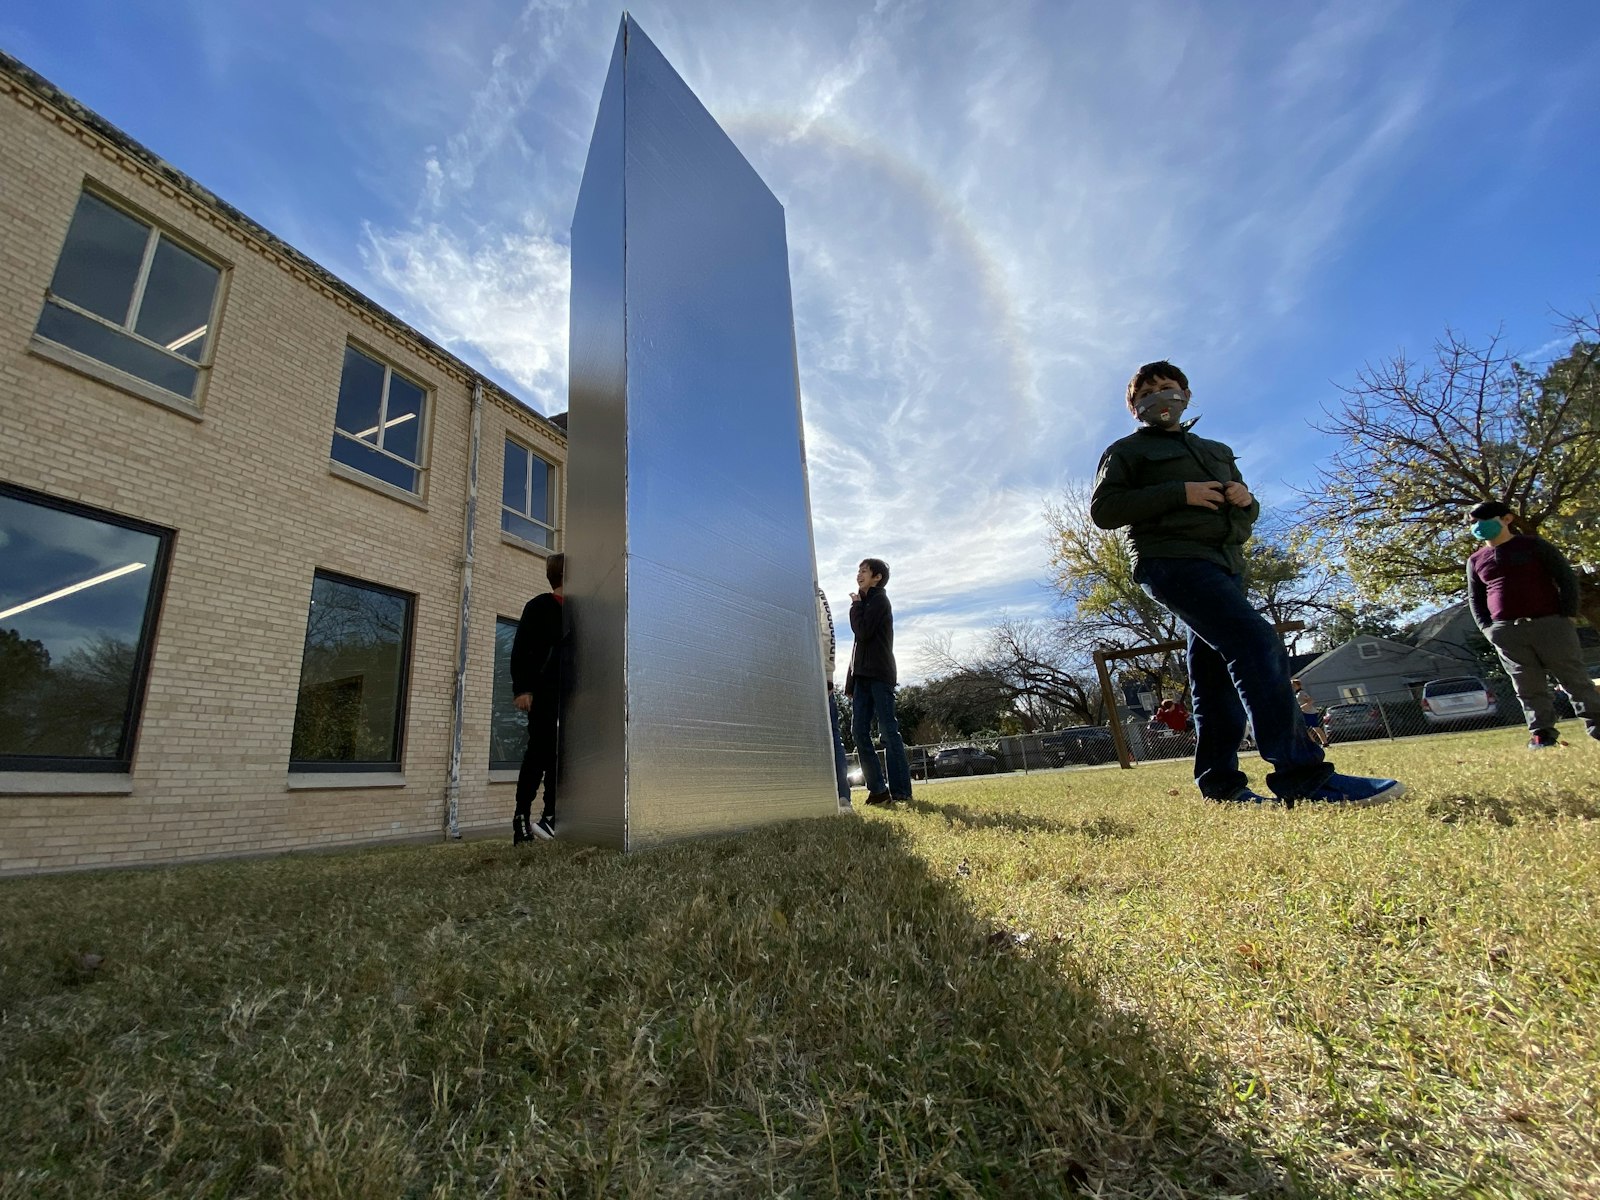 BREAKING: Mysterious Monolith Appears on Dexter Campus